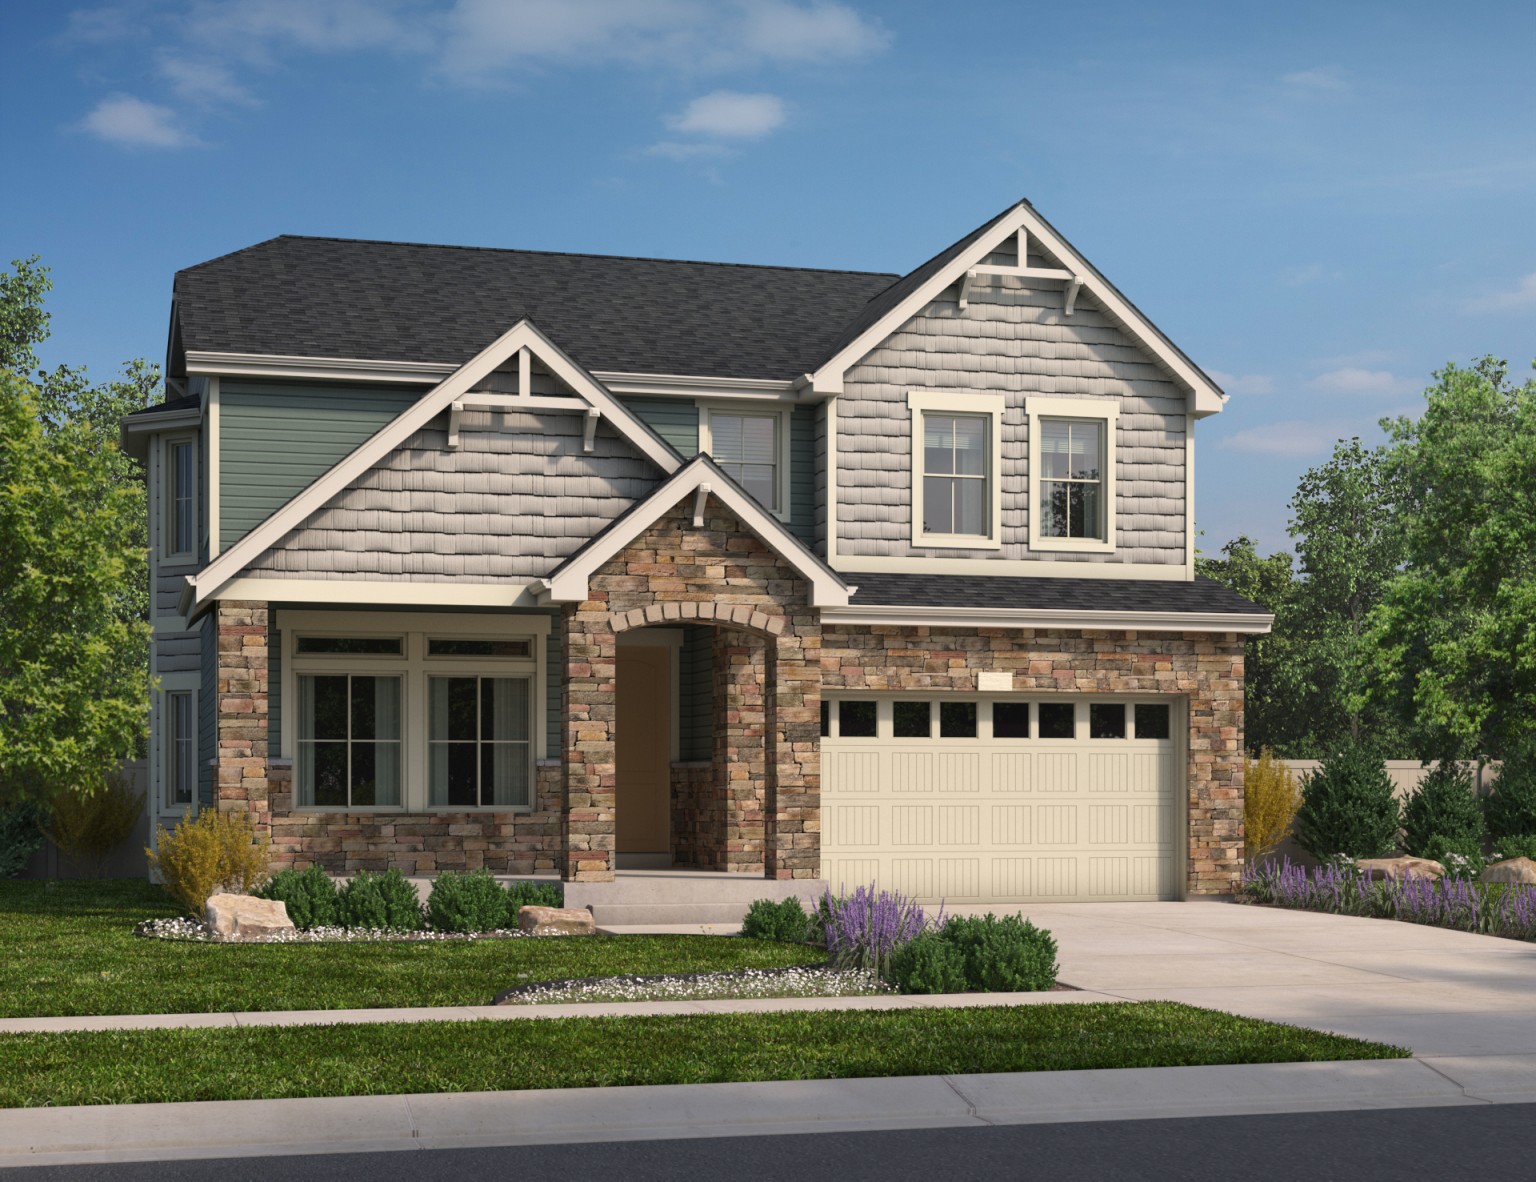 Get Your Tickets for the St. Jude Dream Home® Giveaway Colorado Homes